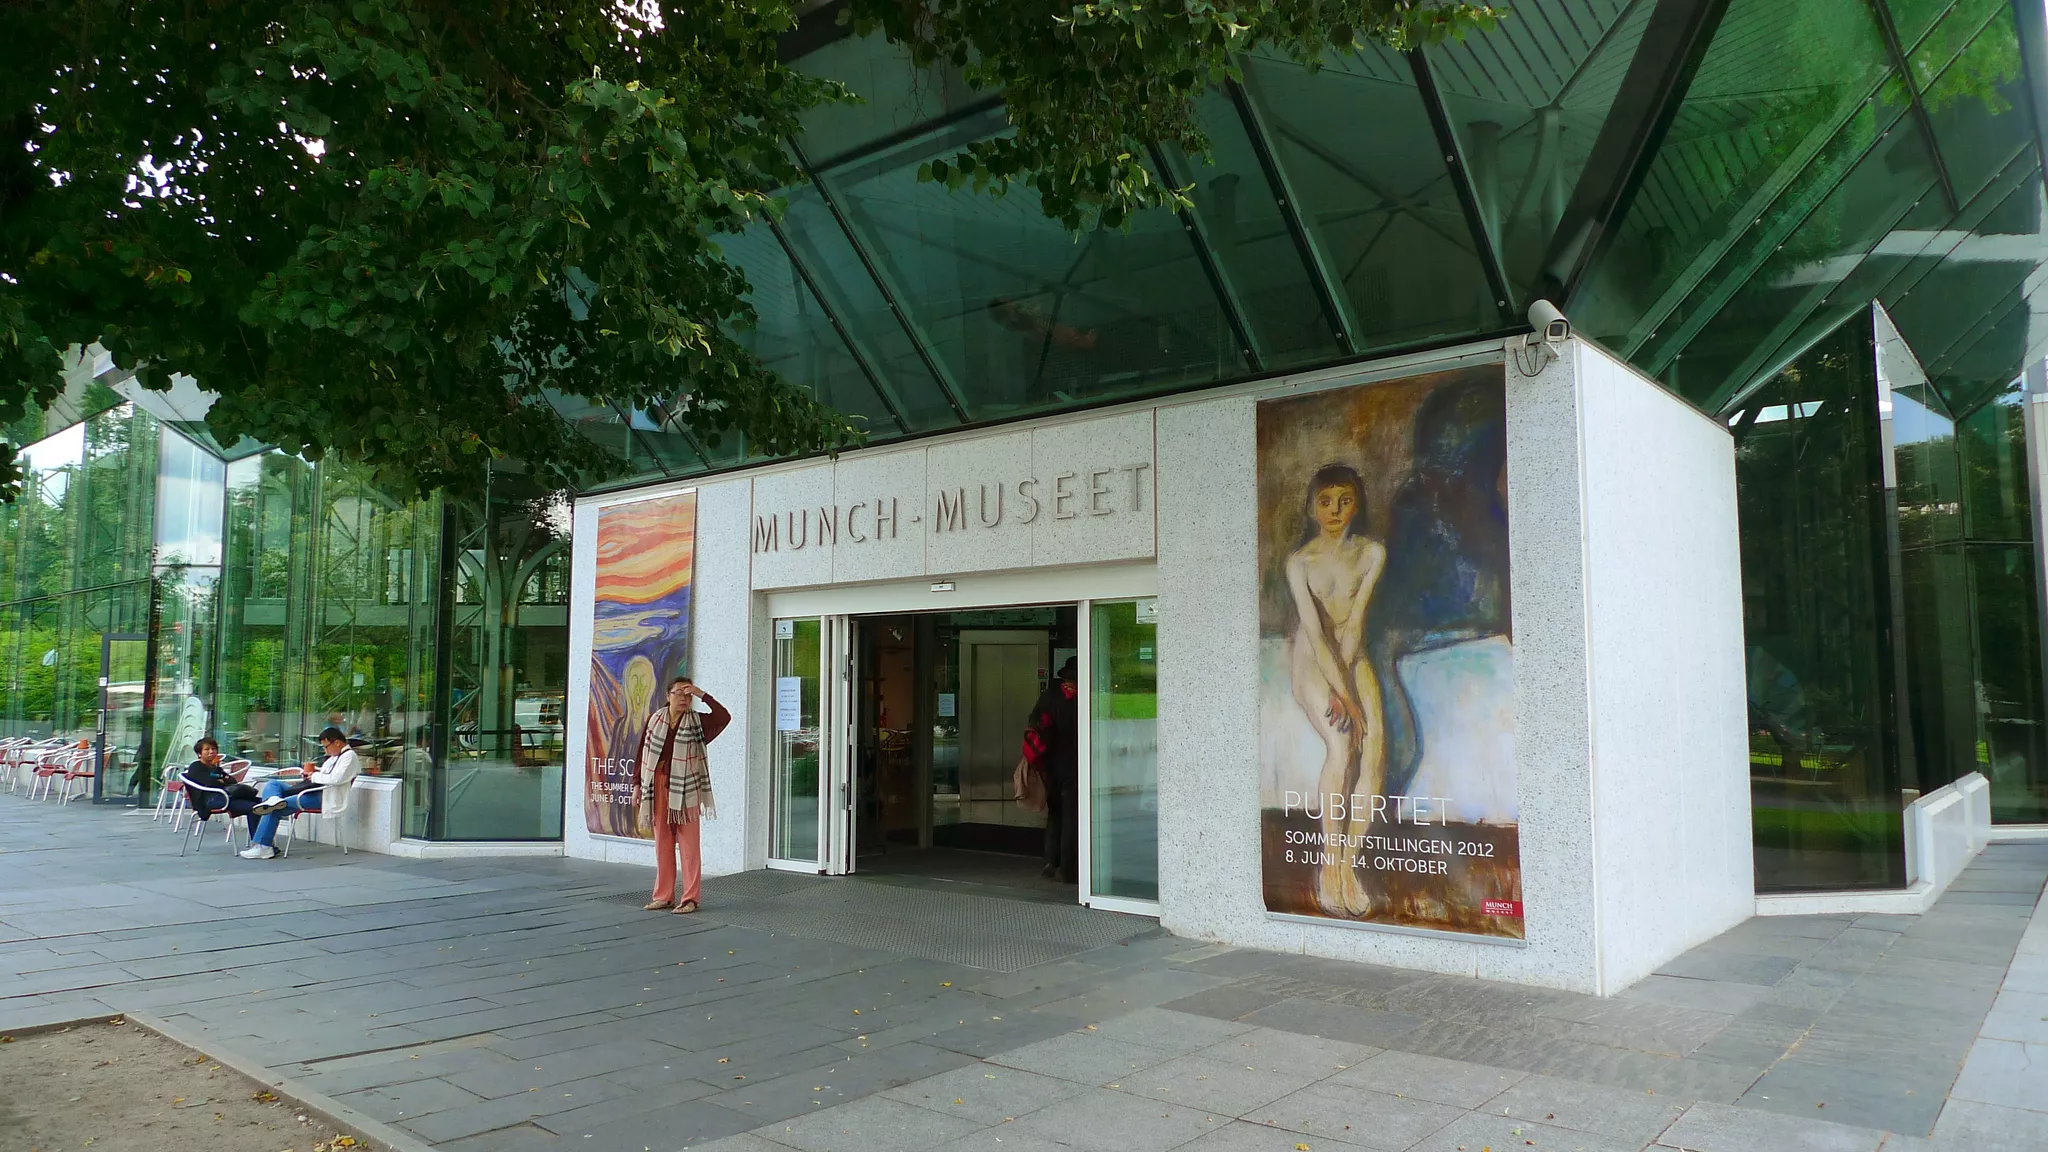 Munch Museum in Norway, Europe | Museums - Rated 3.4